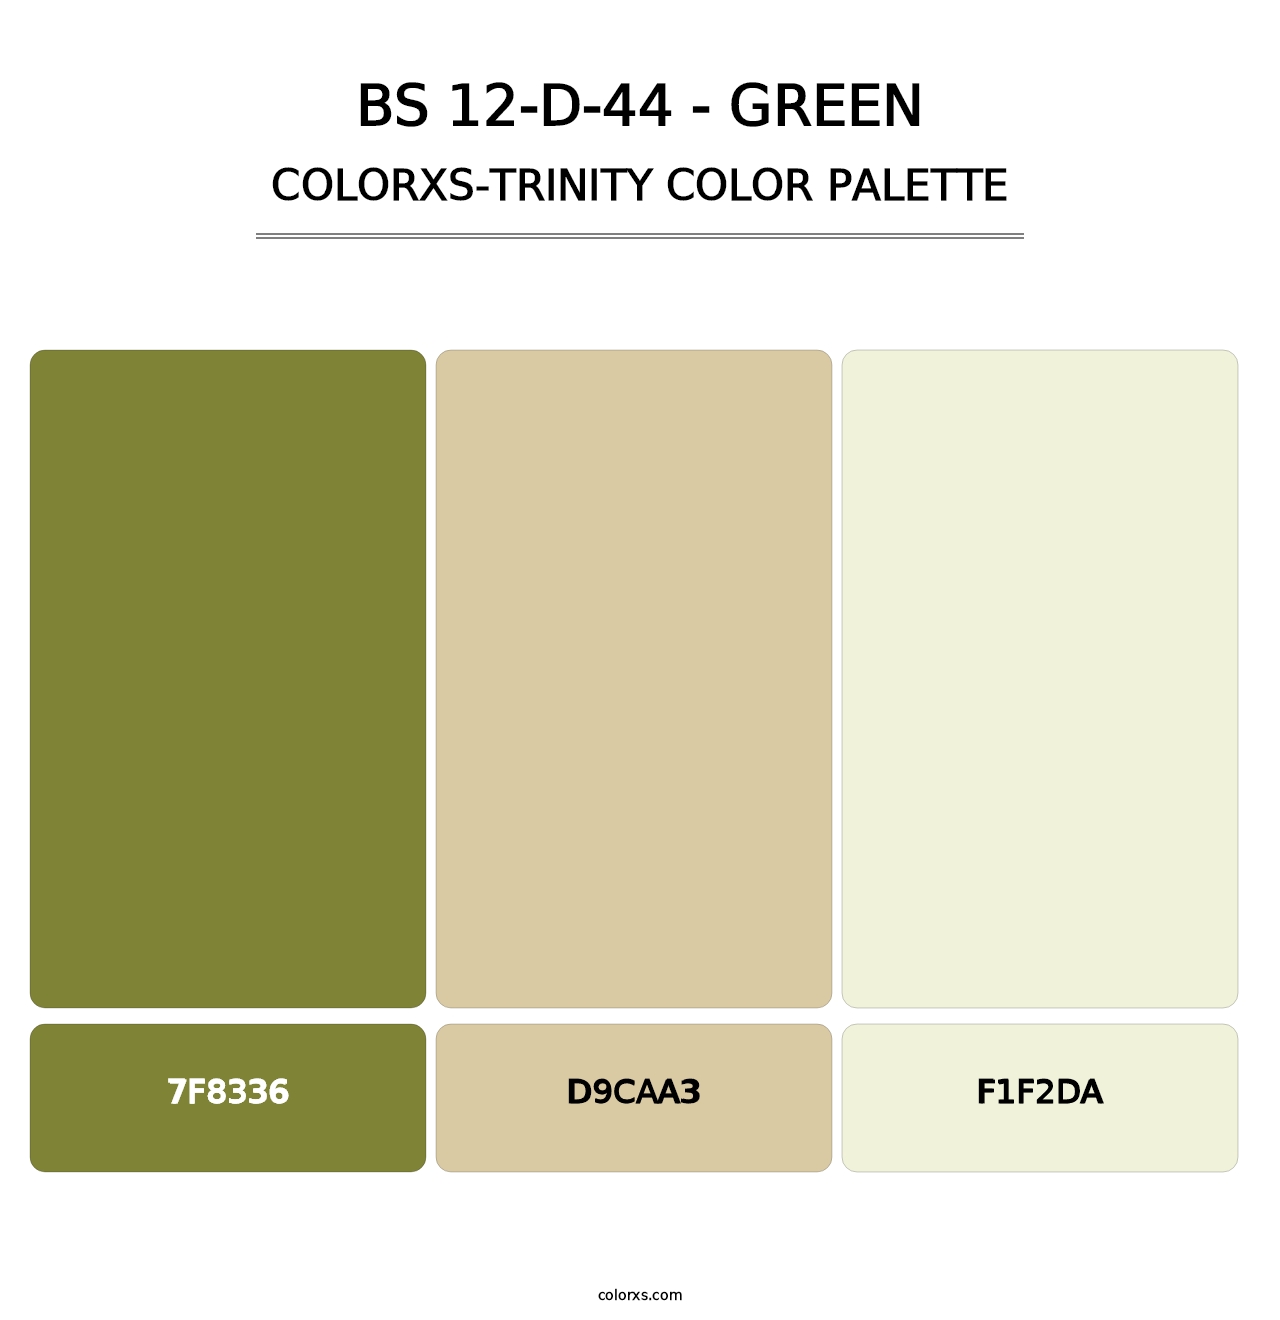 BS 12-D-44 - Green - Colorxs Trinity Palette